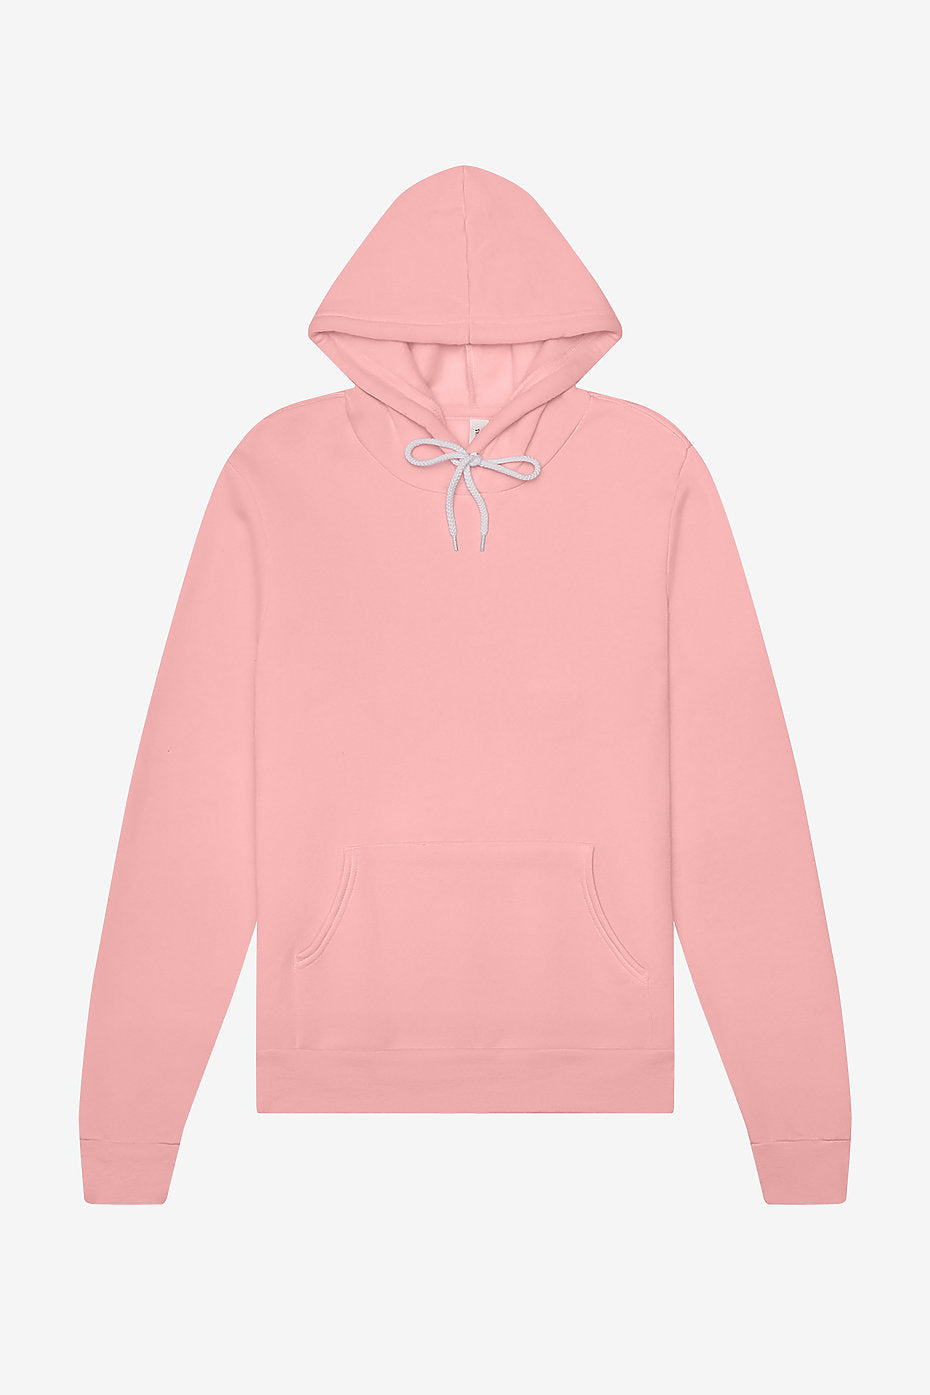 Upside Down (HOODIES - additional colors)